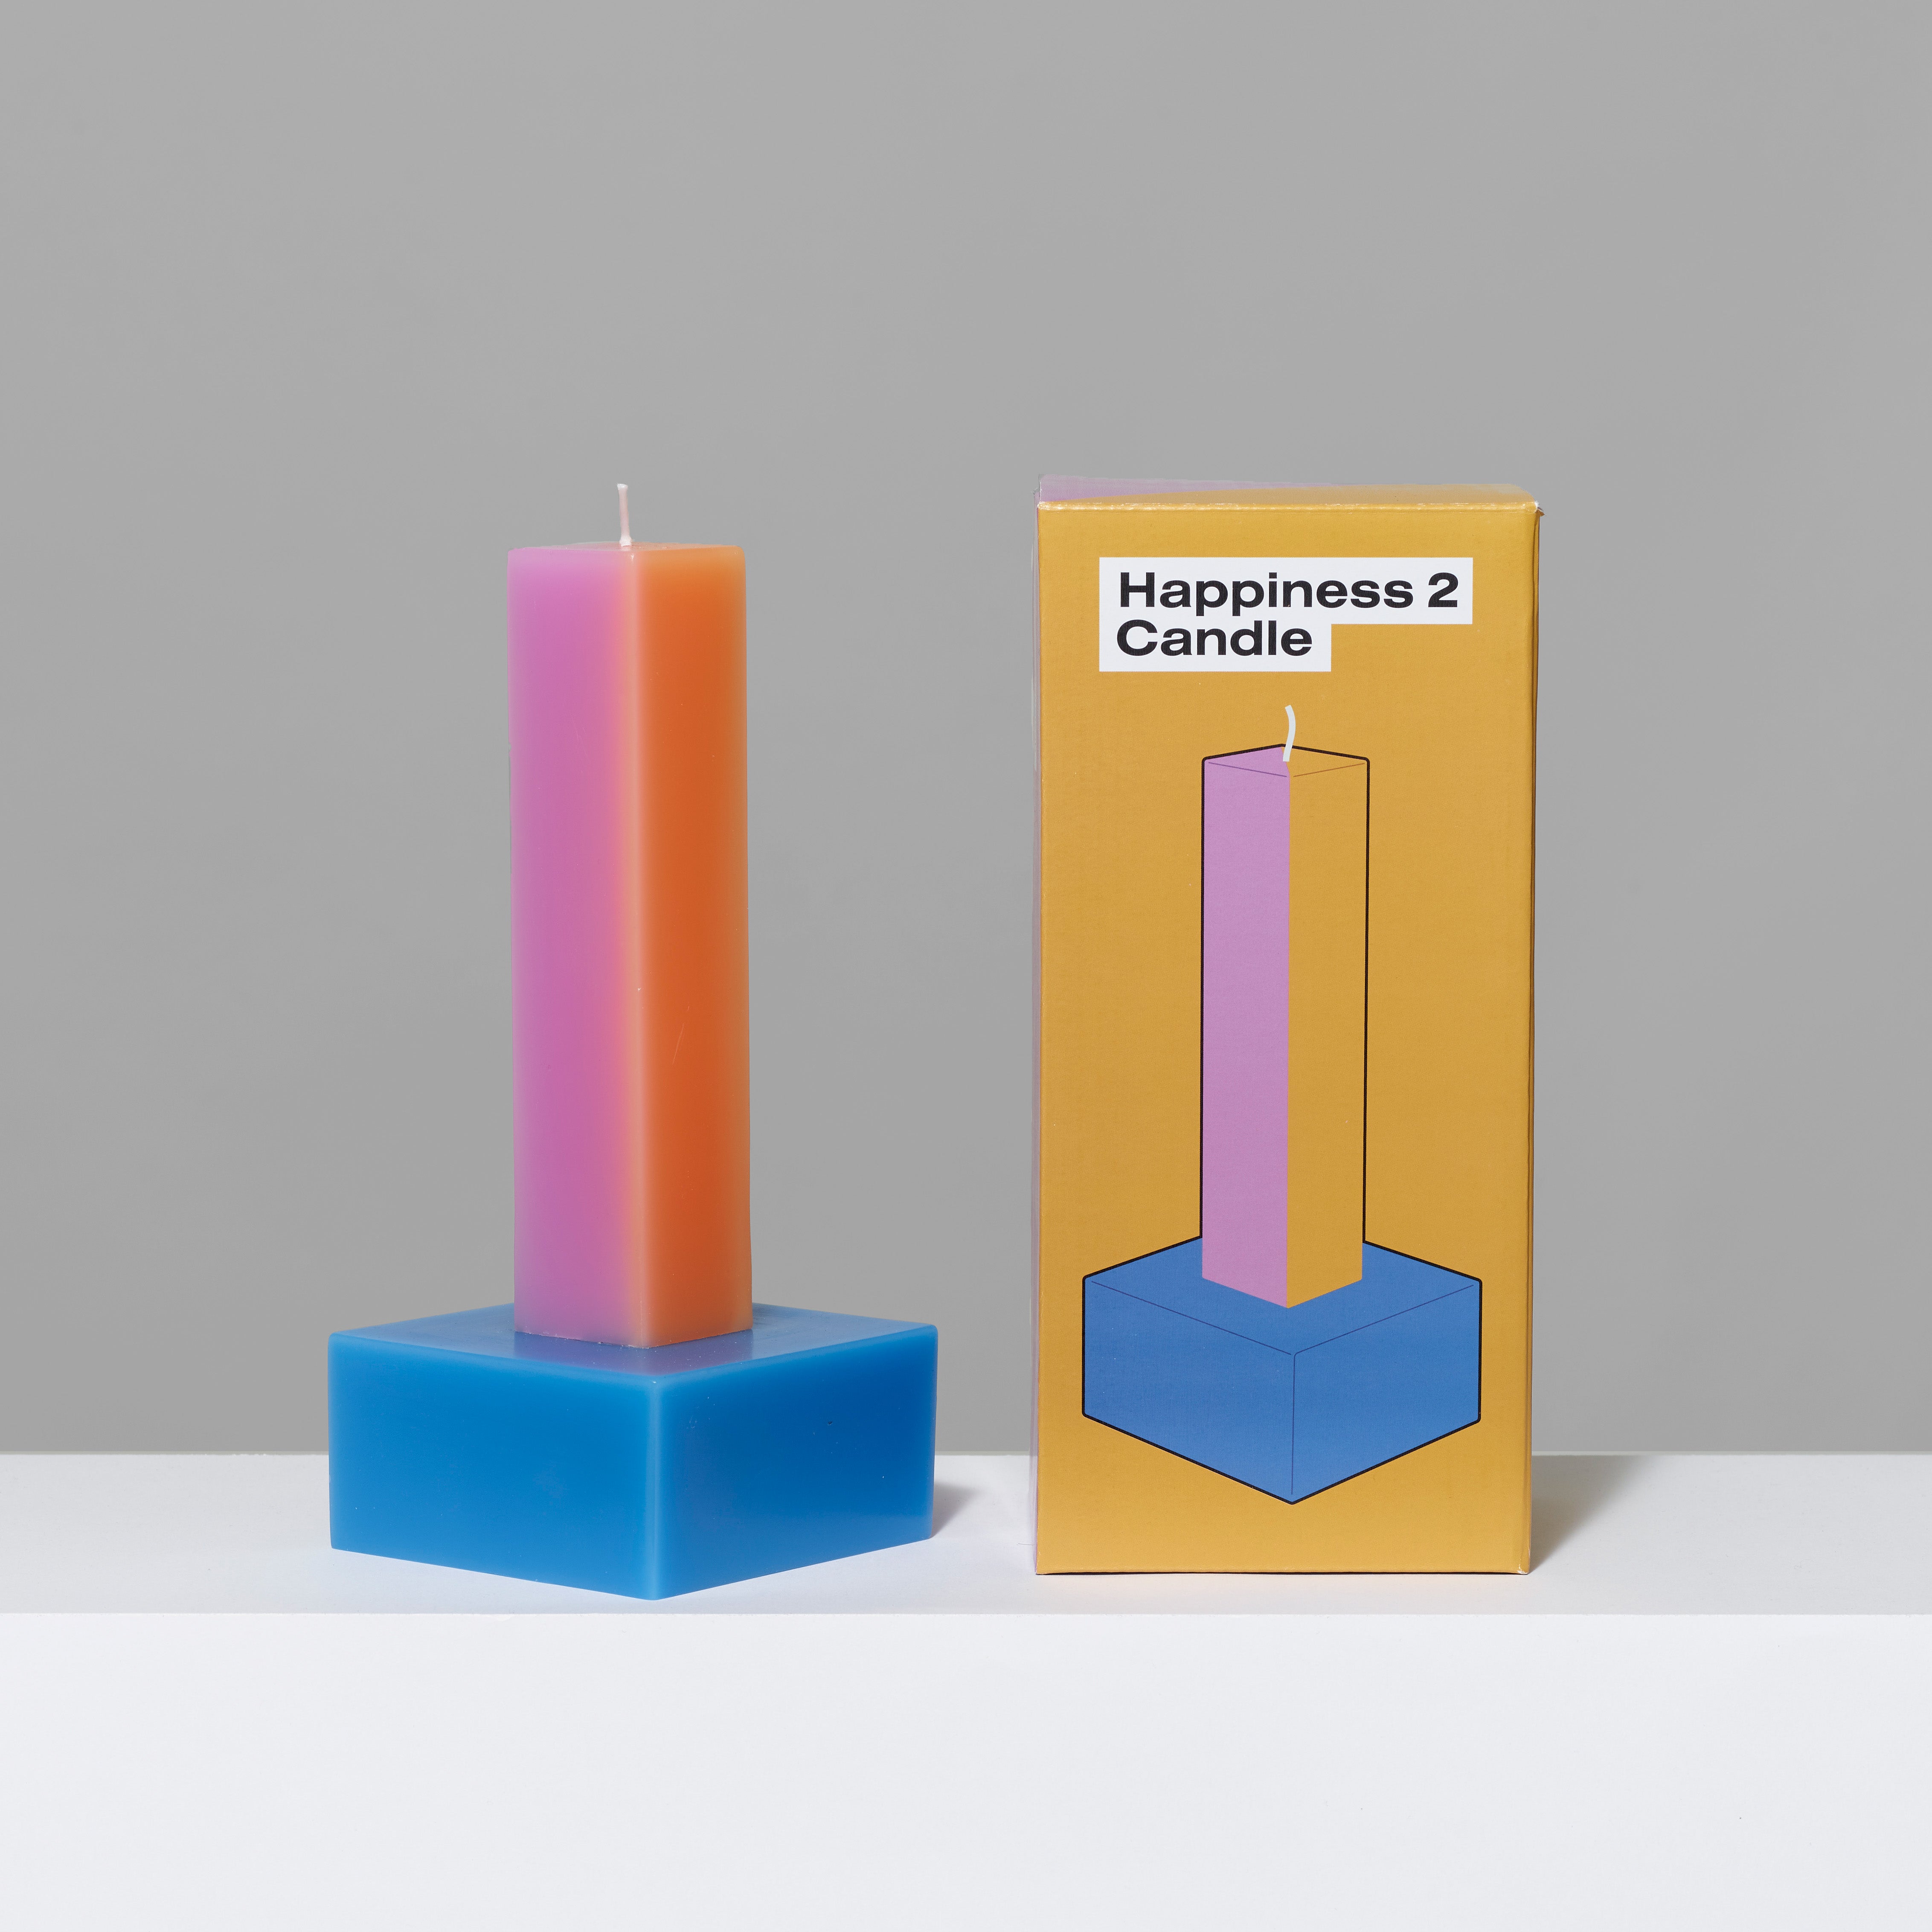 Paraffin wax Orange/Pink Happiness Pillar Candle and box. Measures 4" x 4" x 9".